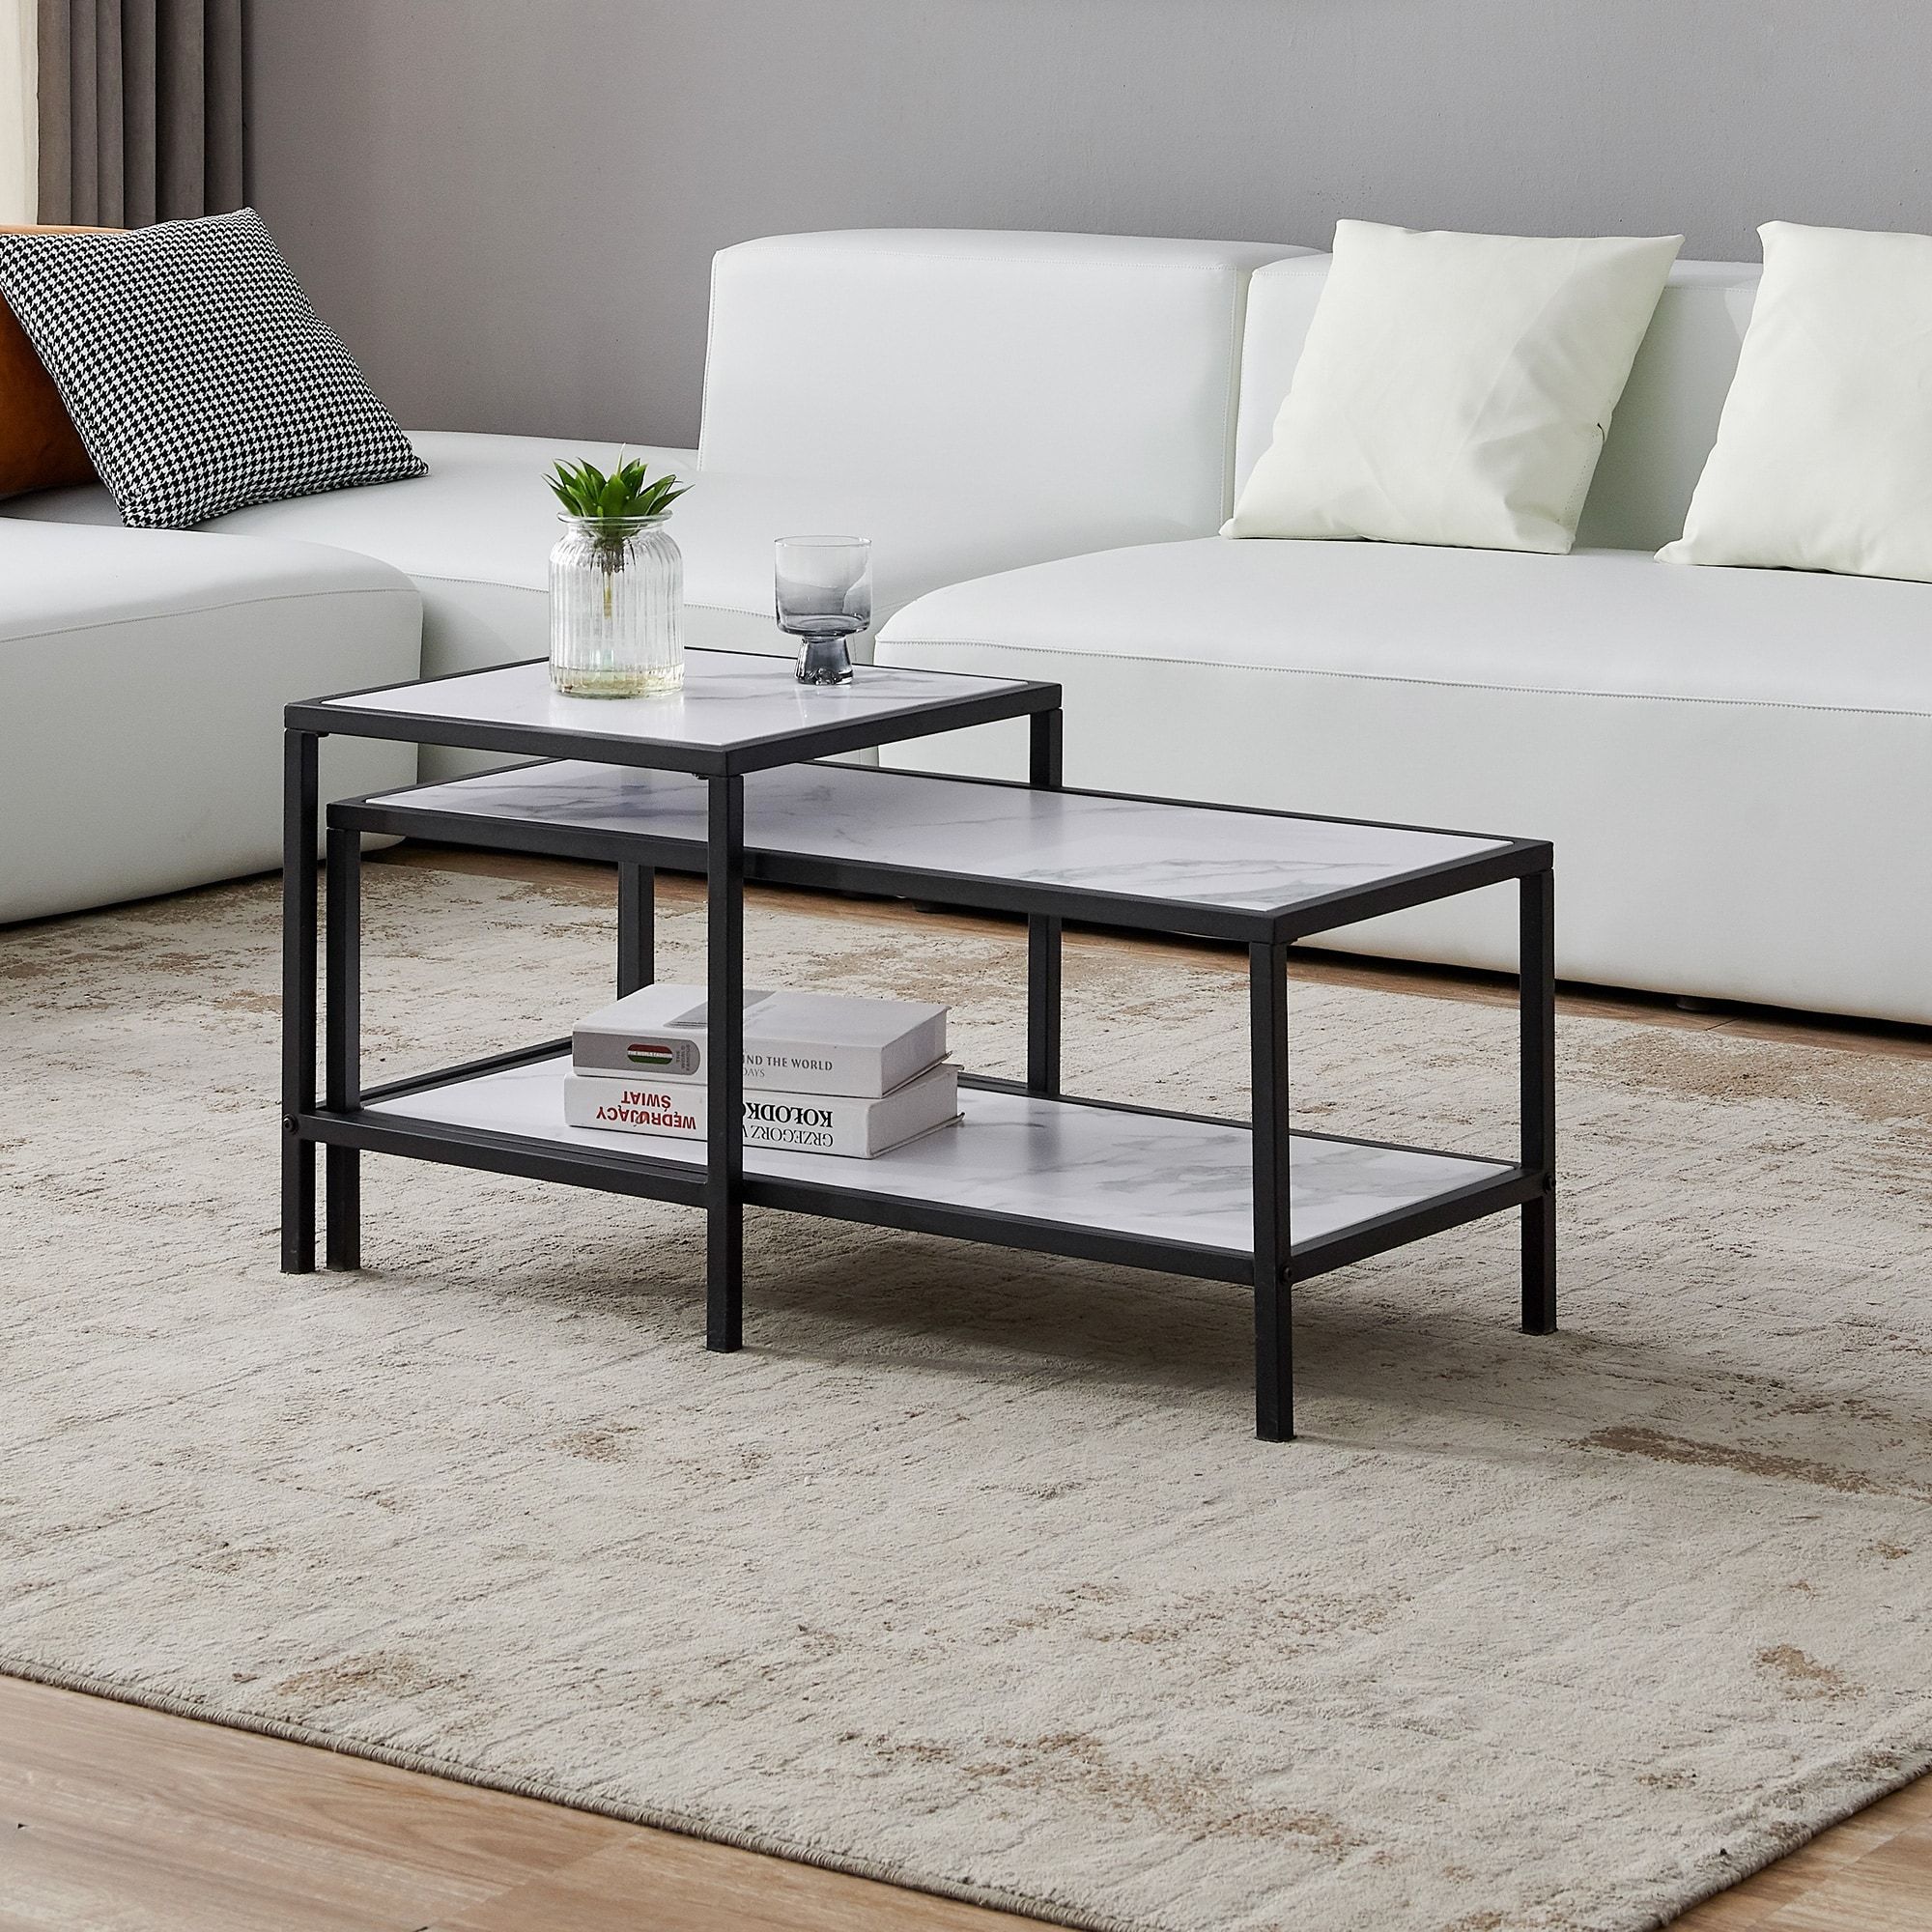 Modern Nesting Coffee Table Square And Rectangle With Metal Frame – Bed  Bath & Beyond – 35492300 Regarding Modern Nesting Coffee Tables (View 9 of 15)